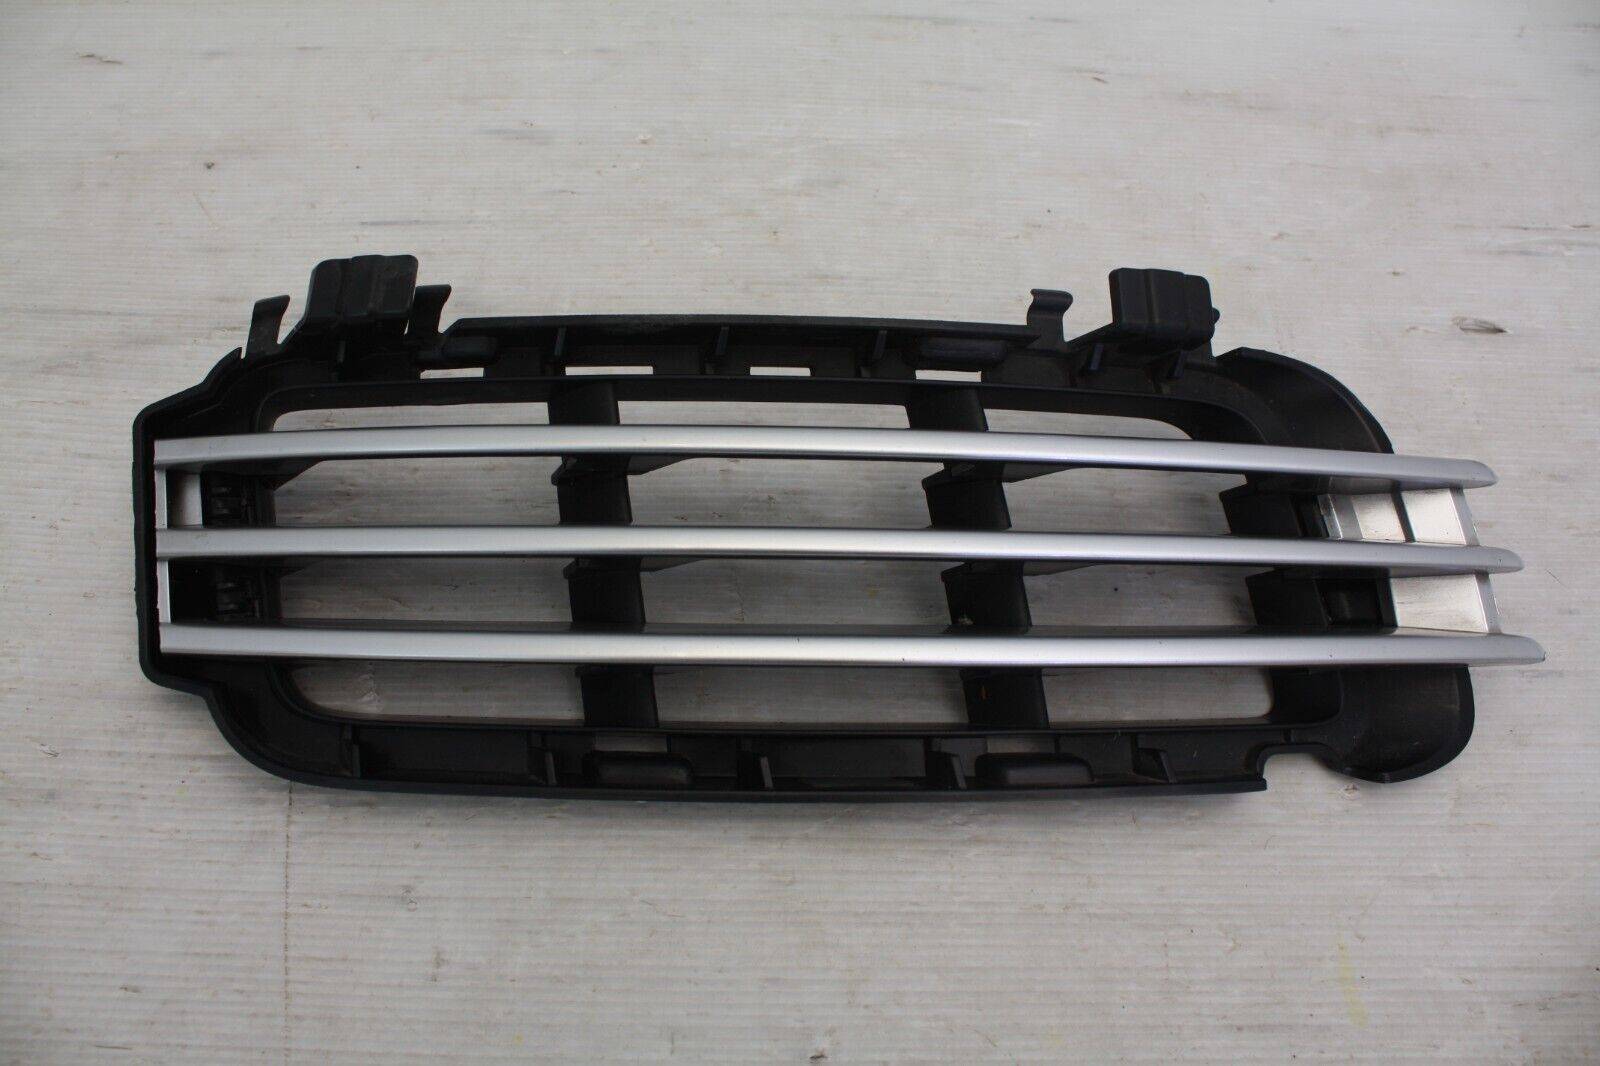 Range Rover Vogue Front Bumper Right Grill 2012 to 2018 CK52 17F908 AA Genuine 176001438466